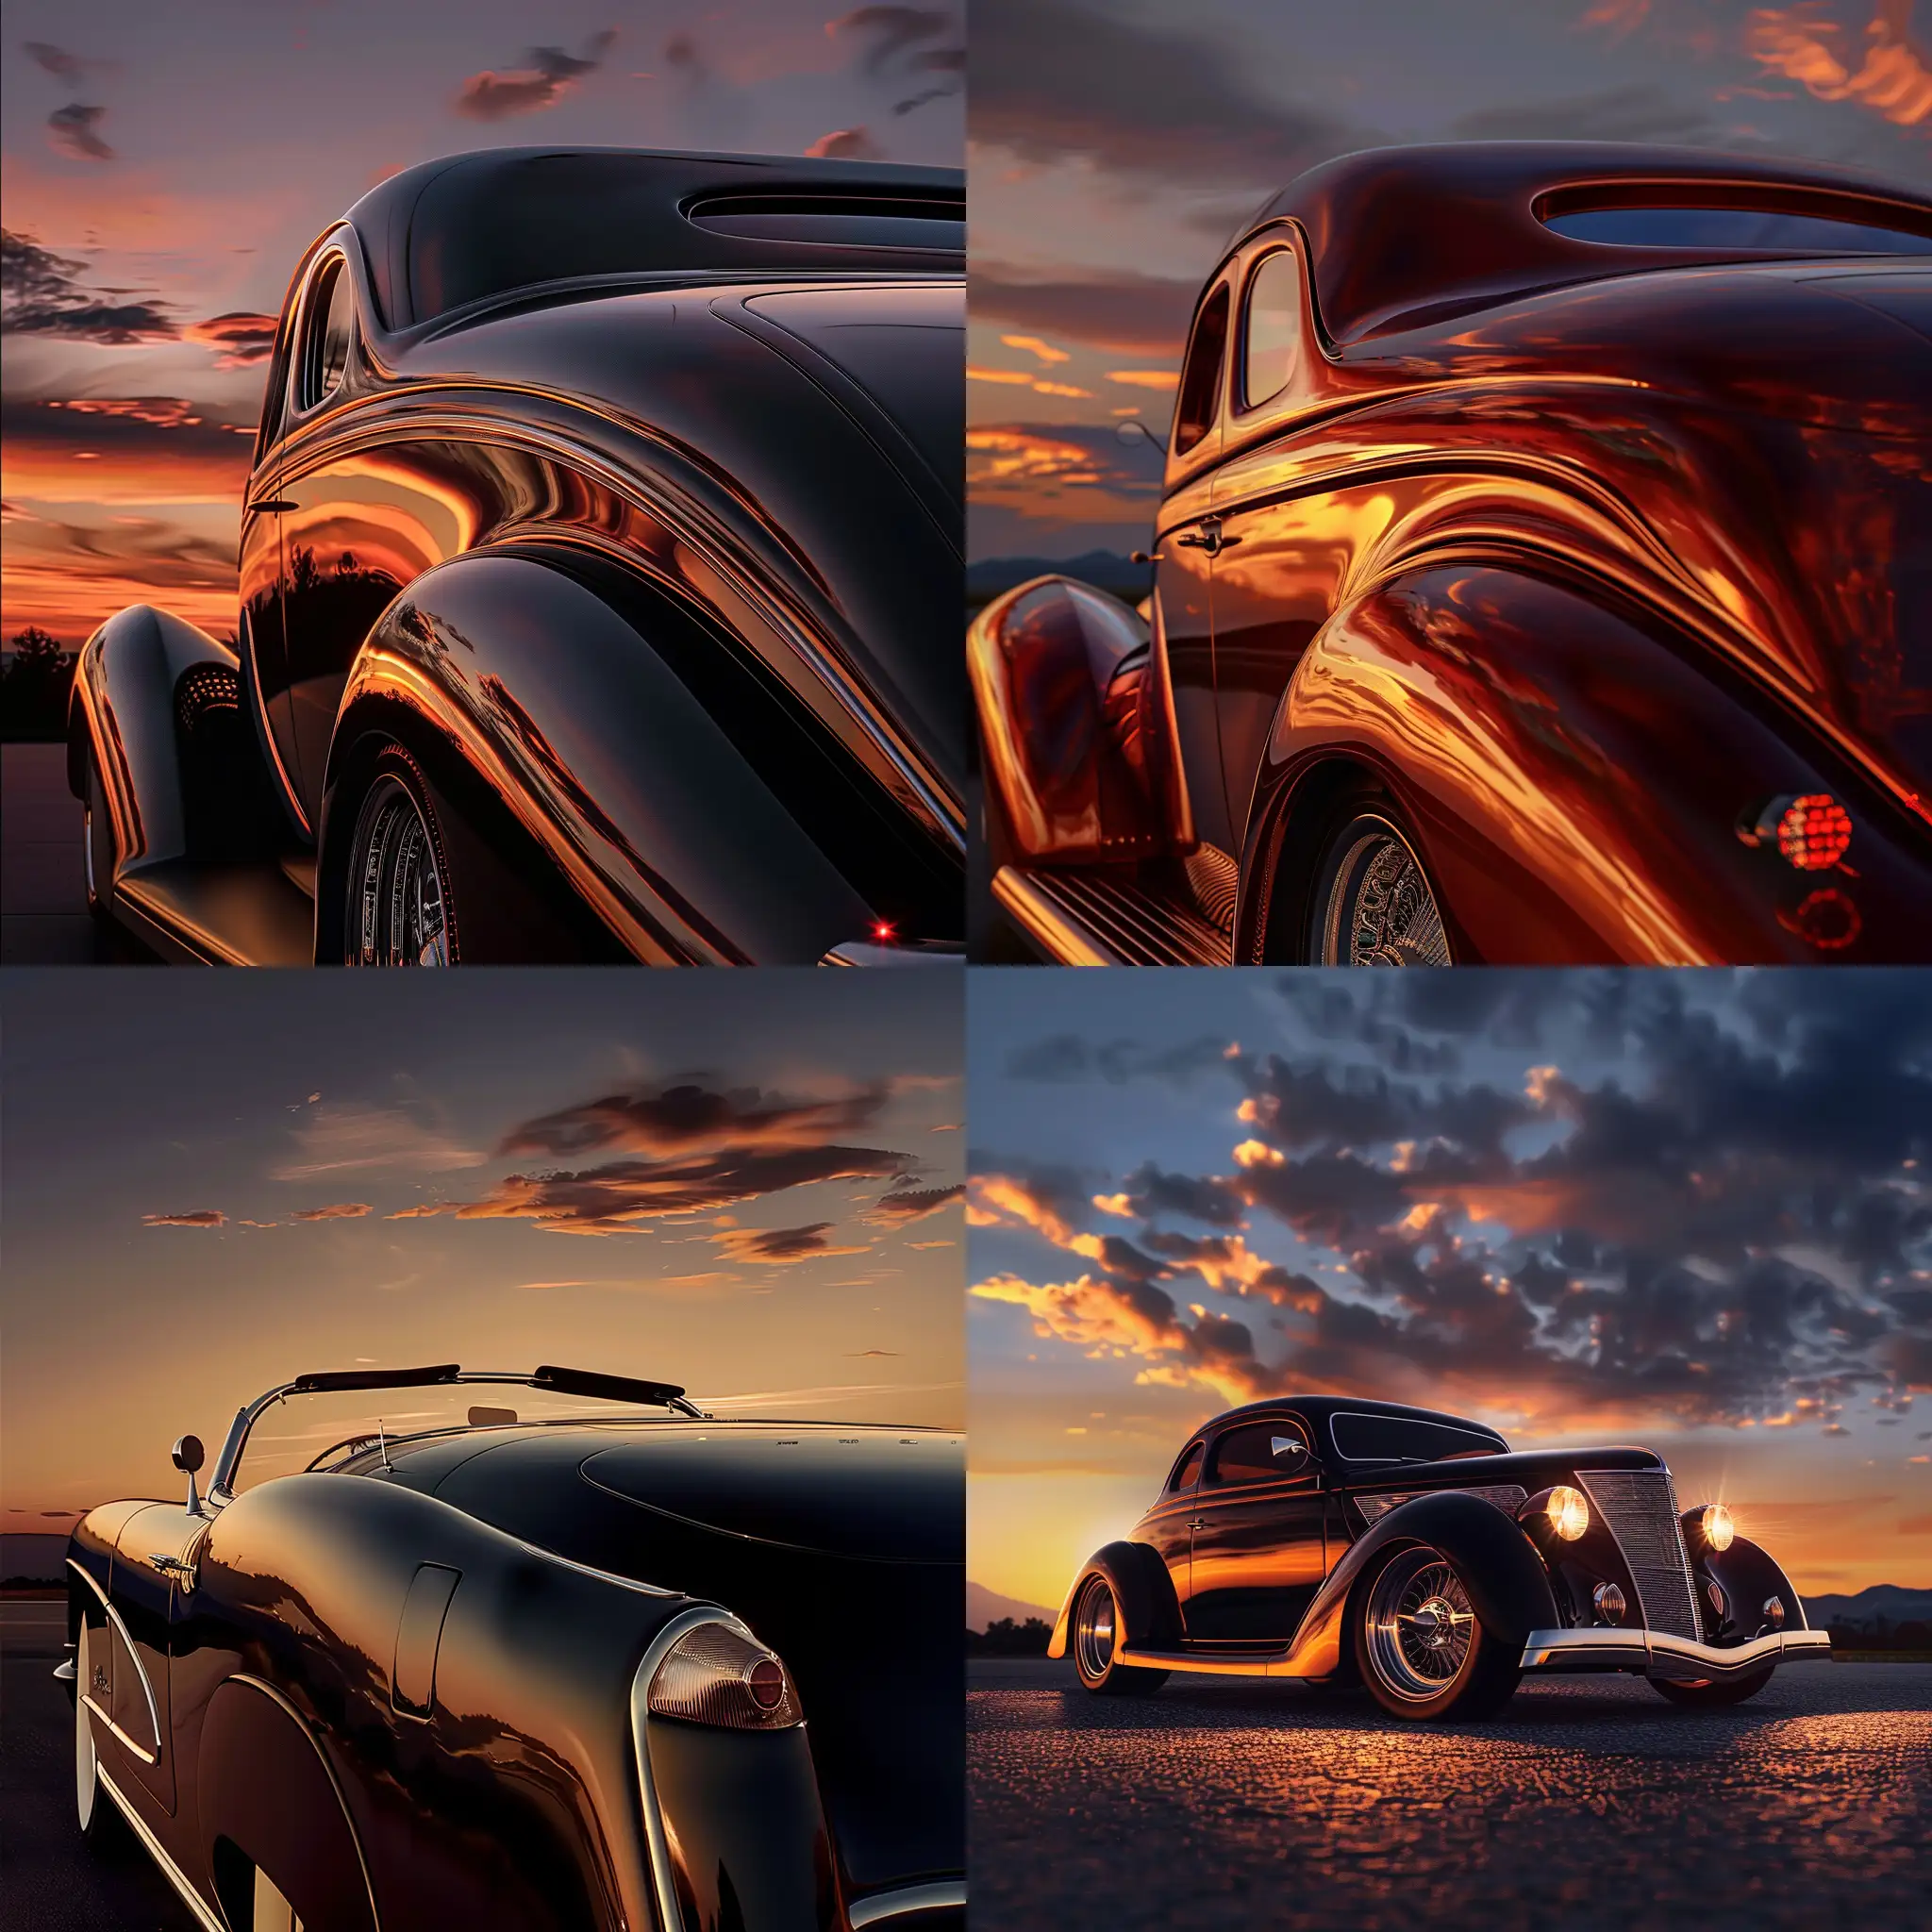 Envision a photorealistic image of a classic car set against a sunset. The image should capture every reflection on the car’s polished surface, the curves that give it its distinctive shape, and the intricate details that make it a classic. The setting should complement the car, with elements that evoke a sense of nostalgia. The lighting should highlight the car’s features, creating a play of light and shadow that adds depth to the image. Use a high-resolution 32k camera with a 16:9 aspect ratio, a raw style, and a quality setting of 2 to capture this timeless scene. –ar 16:9 –v 6 –style raw